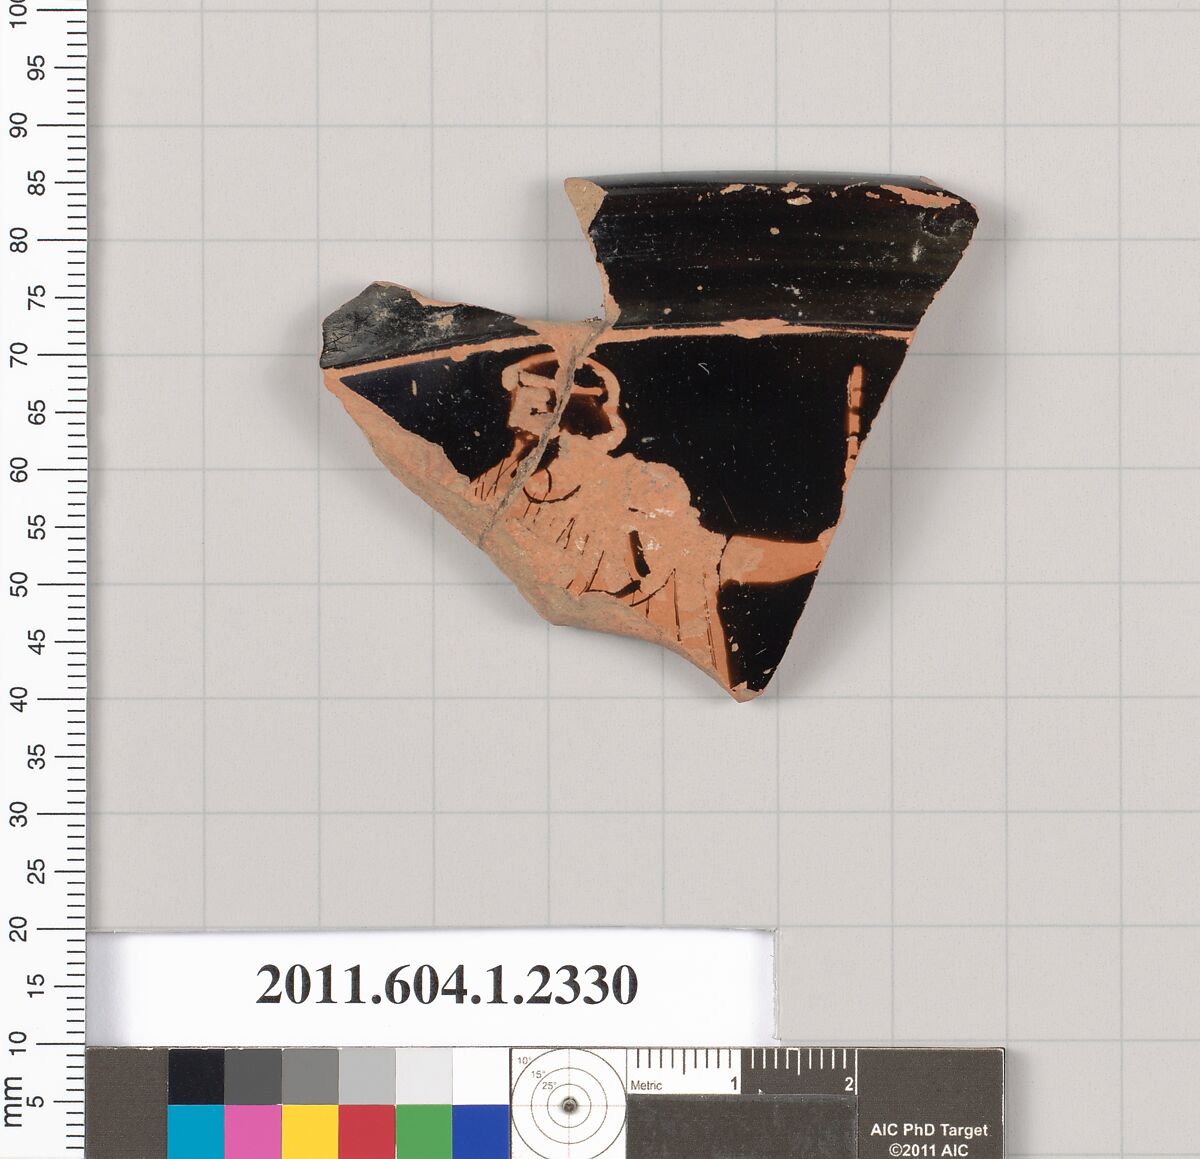 Terracotta rim fragment of a kylix (drinking cup), Attributed to the Carlsruhe Painter [DvB], Terracotta, Greek, Attic 